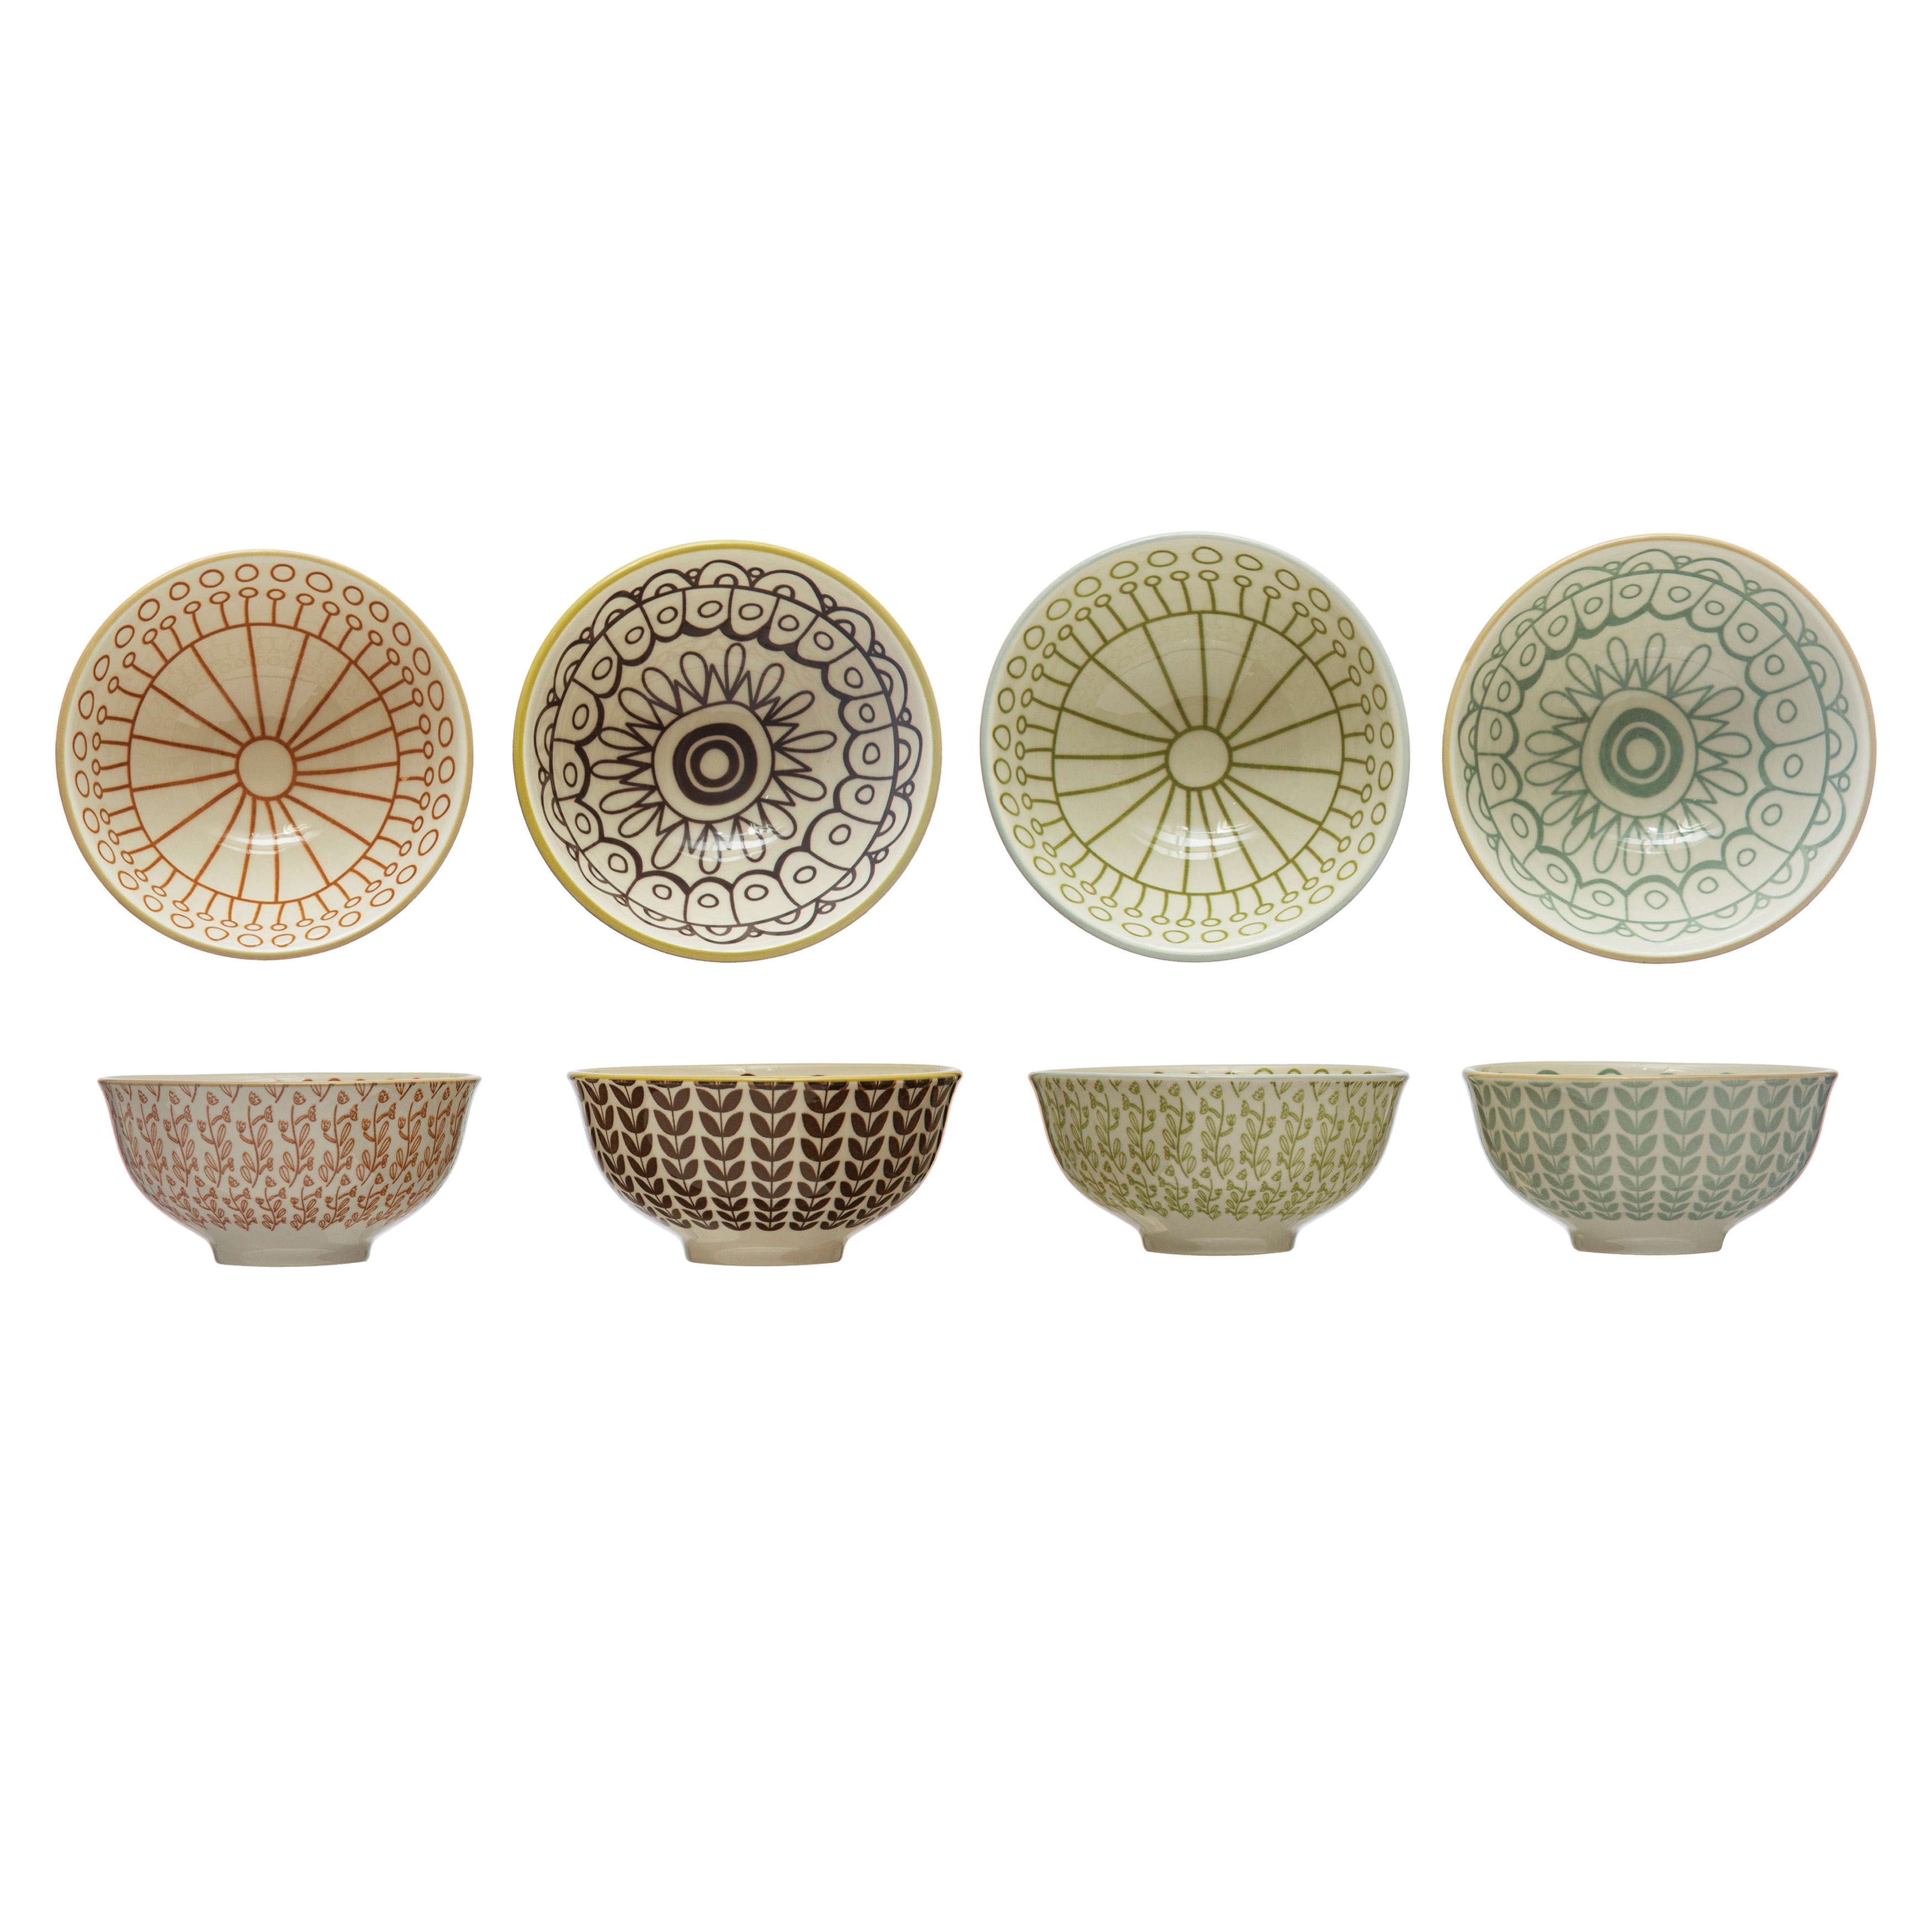 Stoneware Bowls with Painted Patterns, Set of 4 Styles, Multicolor - Image 0